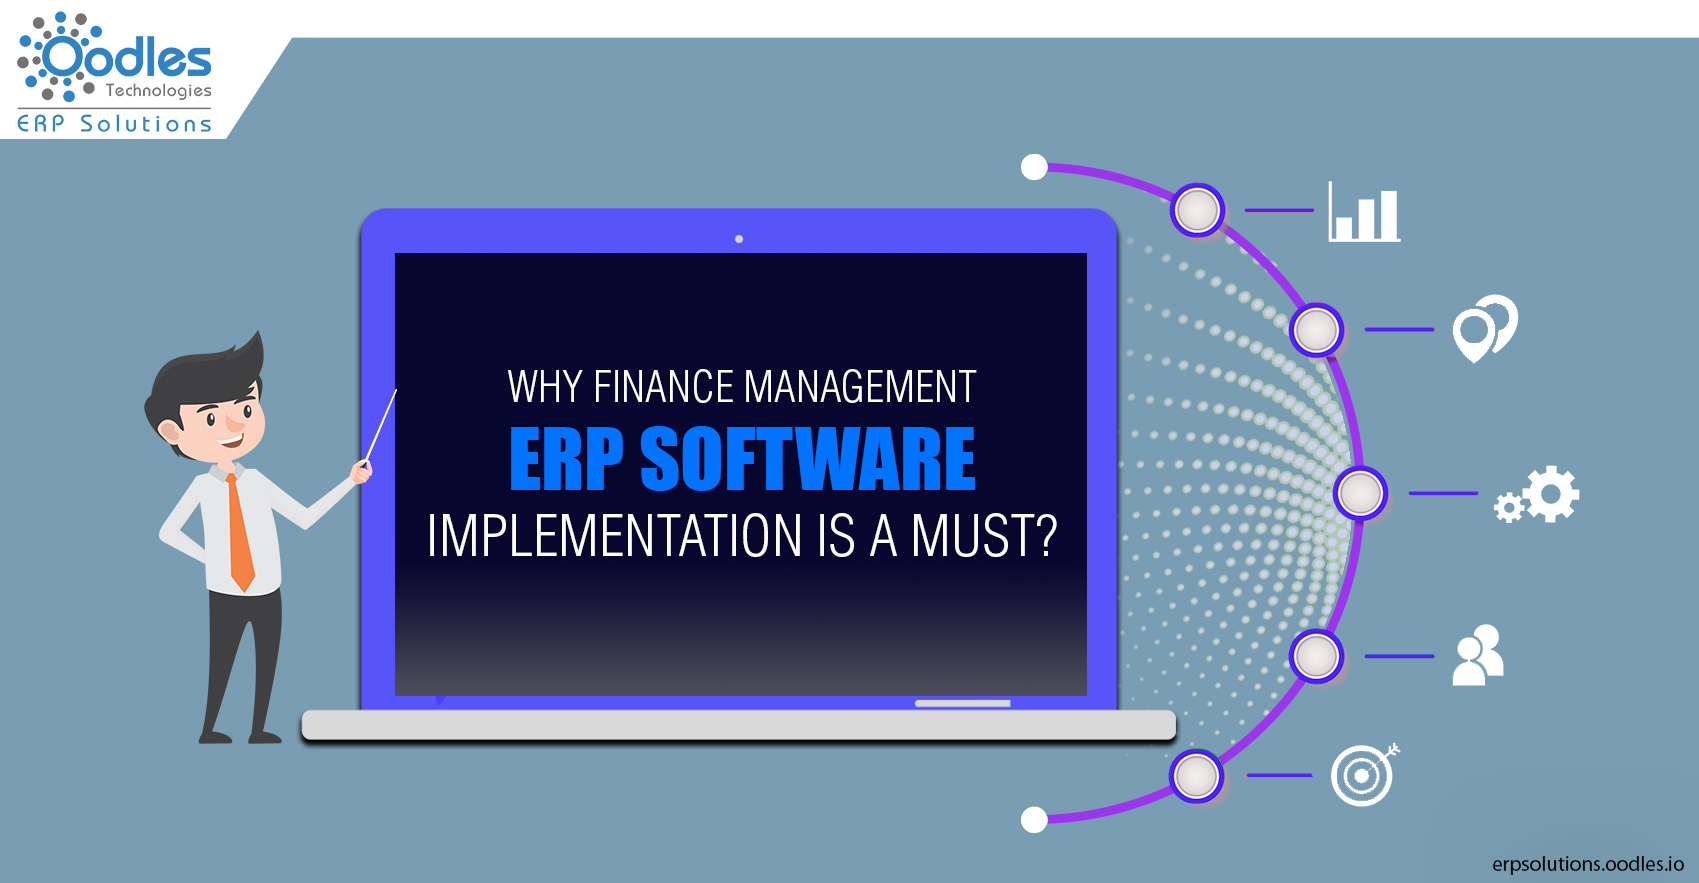 Why ERP Finance Management Software Implementation Is A Must?